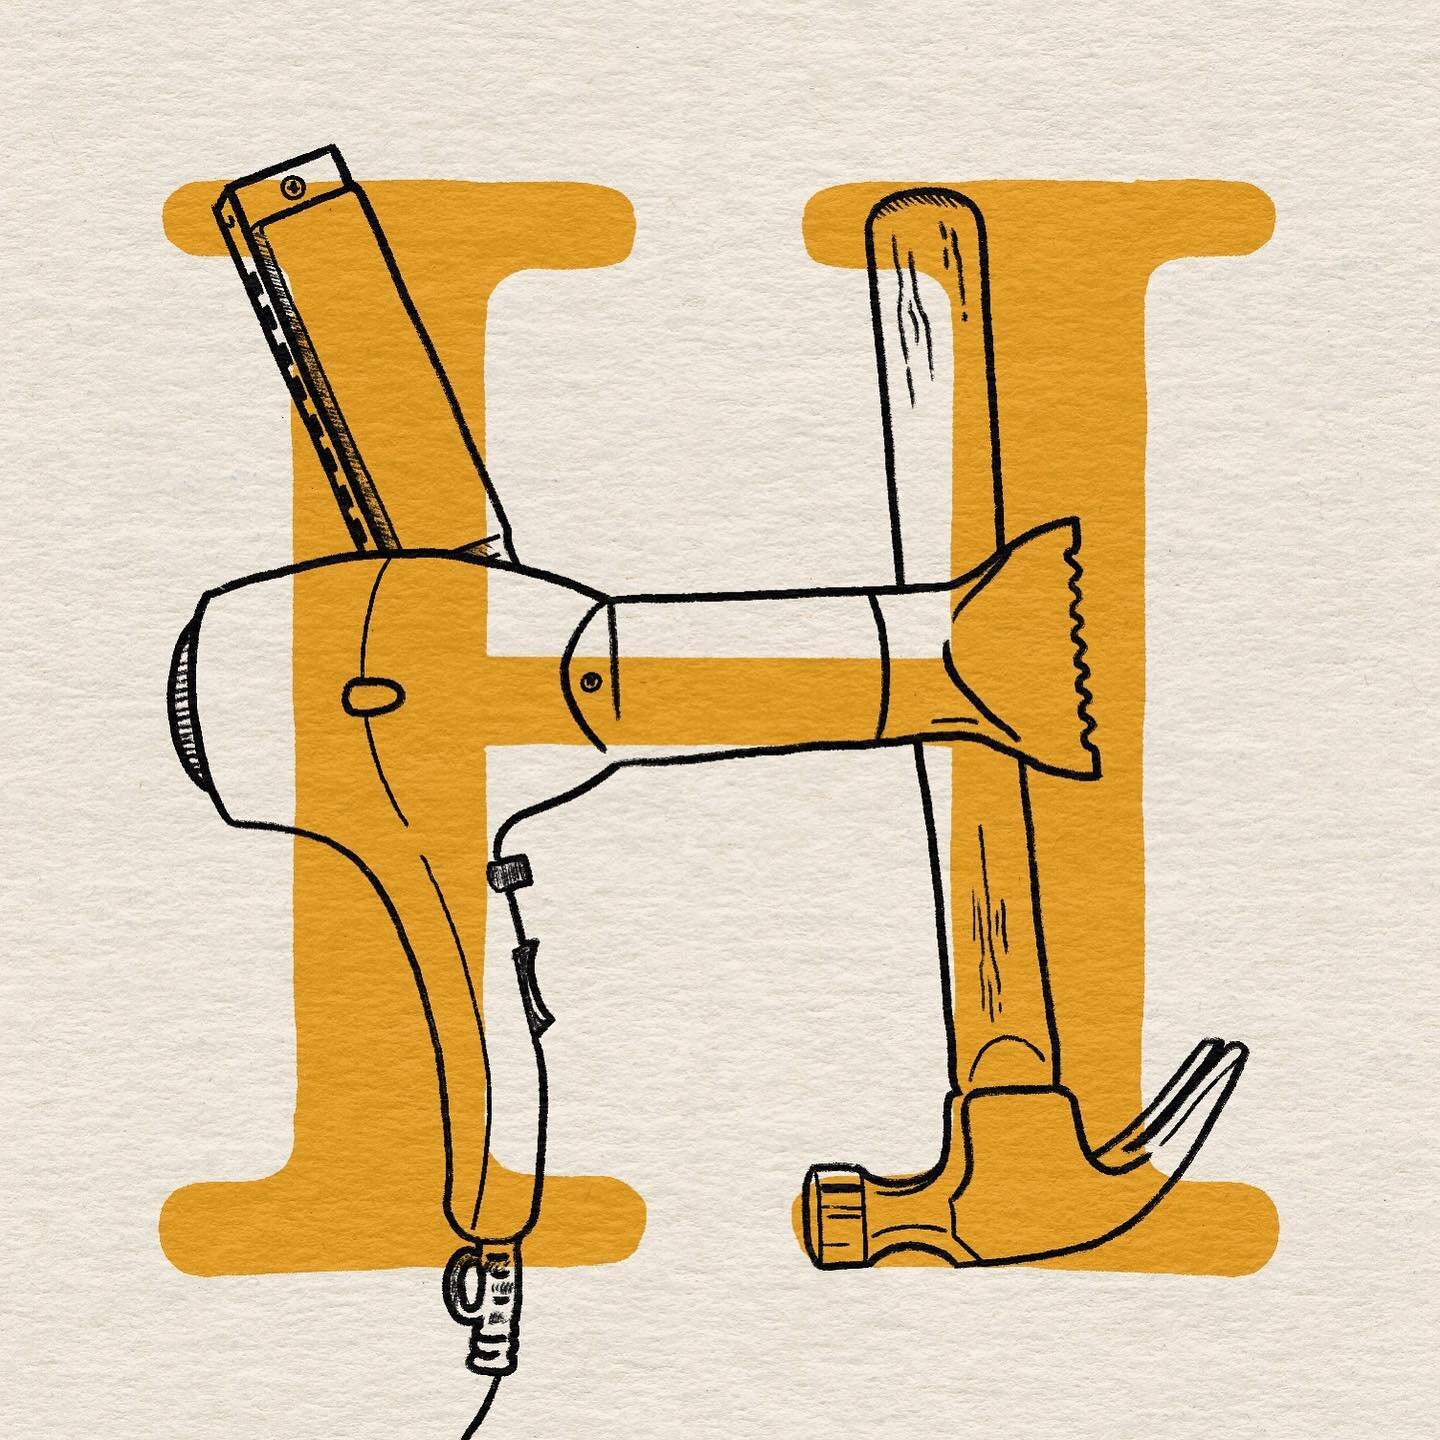 H #36daysoftype #36days_h 
&hellip;
Hairdryer, hammer, and harmonica
&hellip;
Still in catch up mode - no worries, aiming to catch up and get ahead this week 🤞☺️